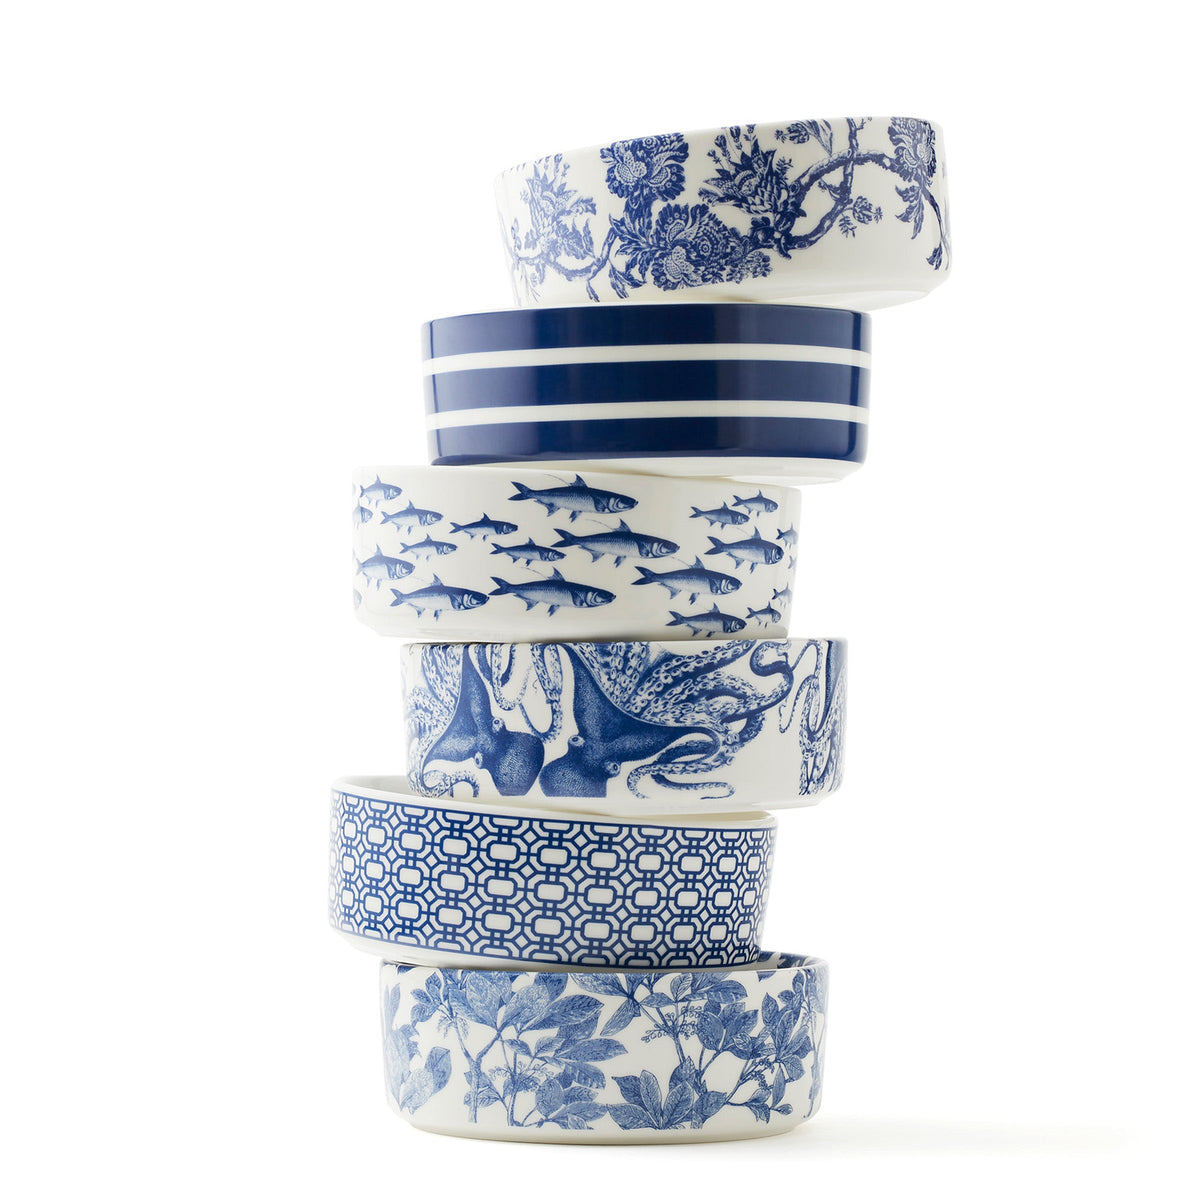 A stack of Newport Garden Gate Medium Pet Bowls in blue and white, featuring the 6 best-selling patterns by Caskata.